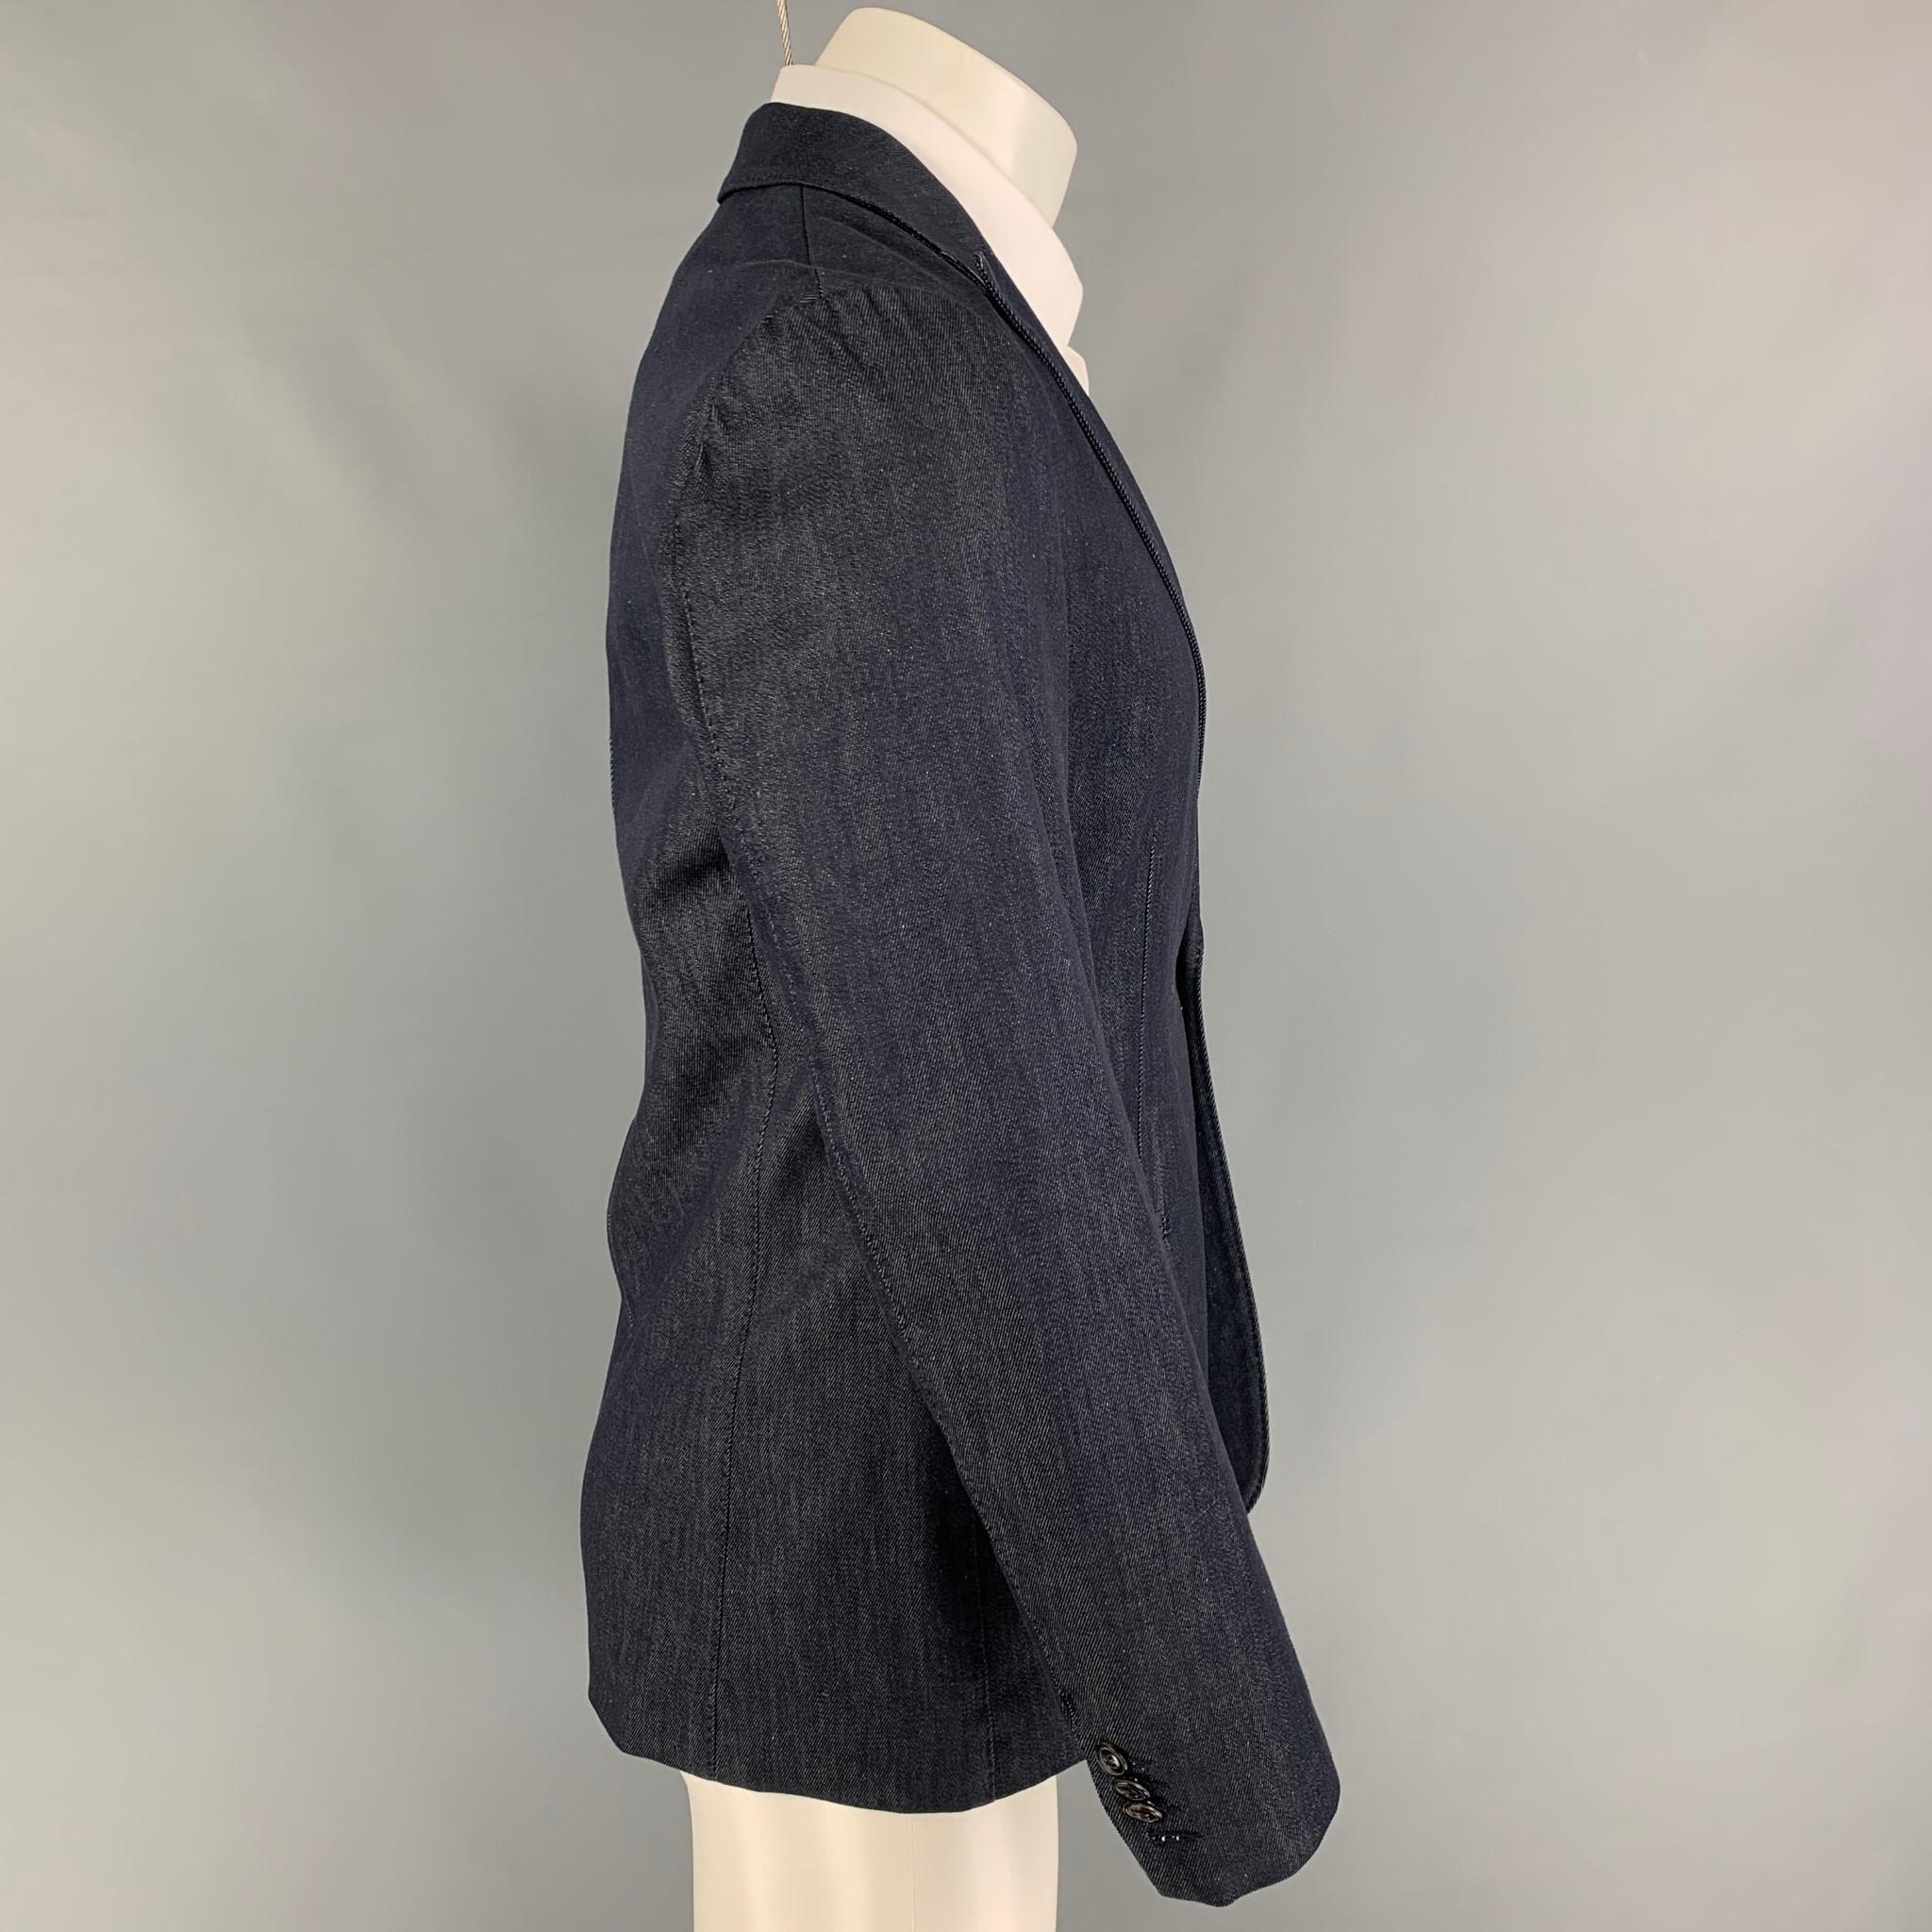 GIORGIO ARMANI sport coat comes in a indigo cotton with a half liner featuring a peak lapel, slit pockets, and a single button closure. Made in Italy. 

New With Tags. 
Marked: 52

Measurements:

Shoulder: 18 in.
Chest: 40 in.
Sleeve: 25 in.
Length: